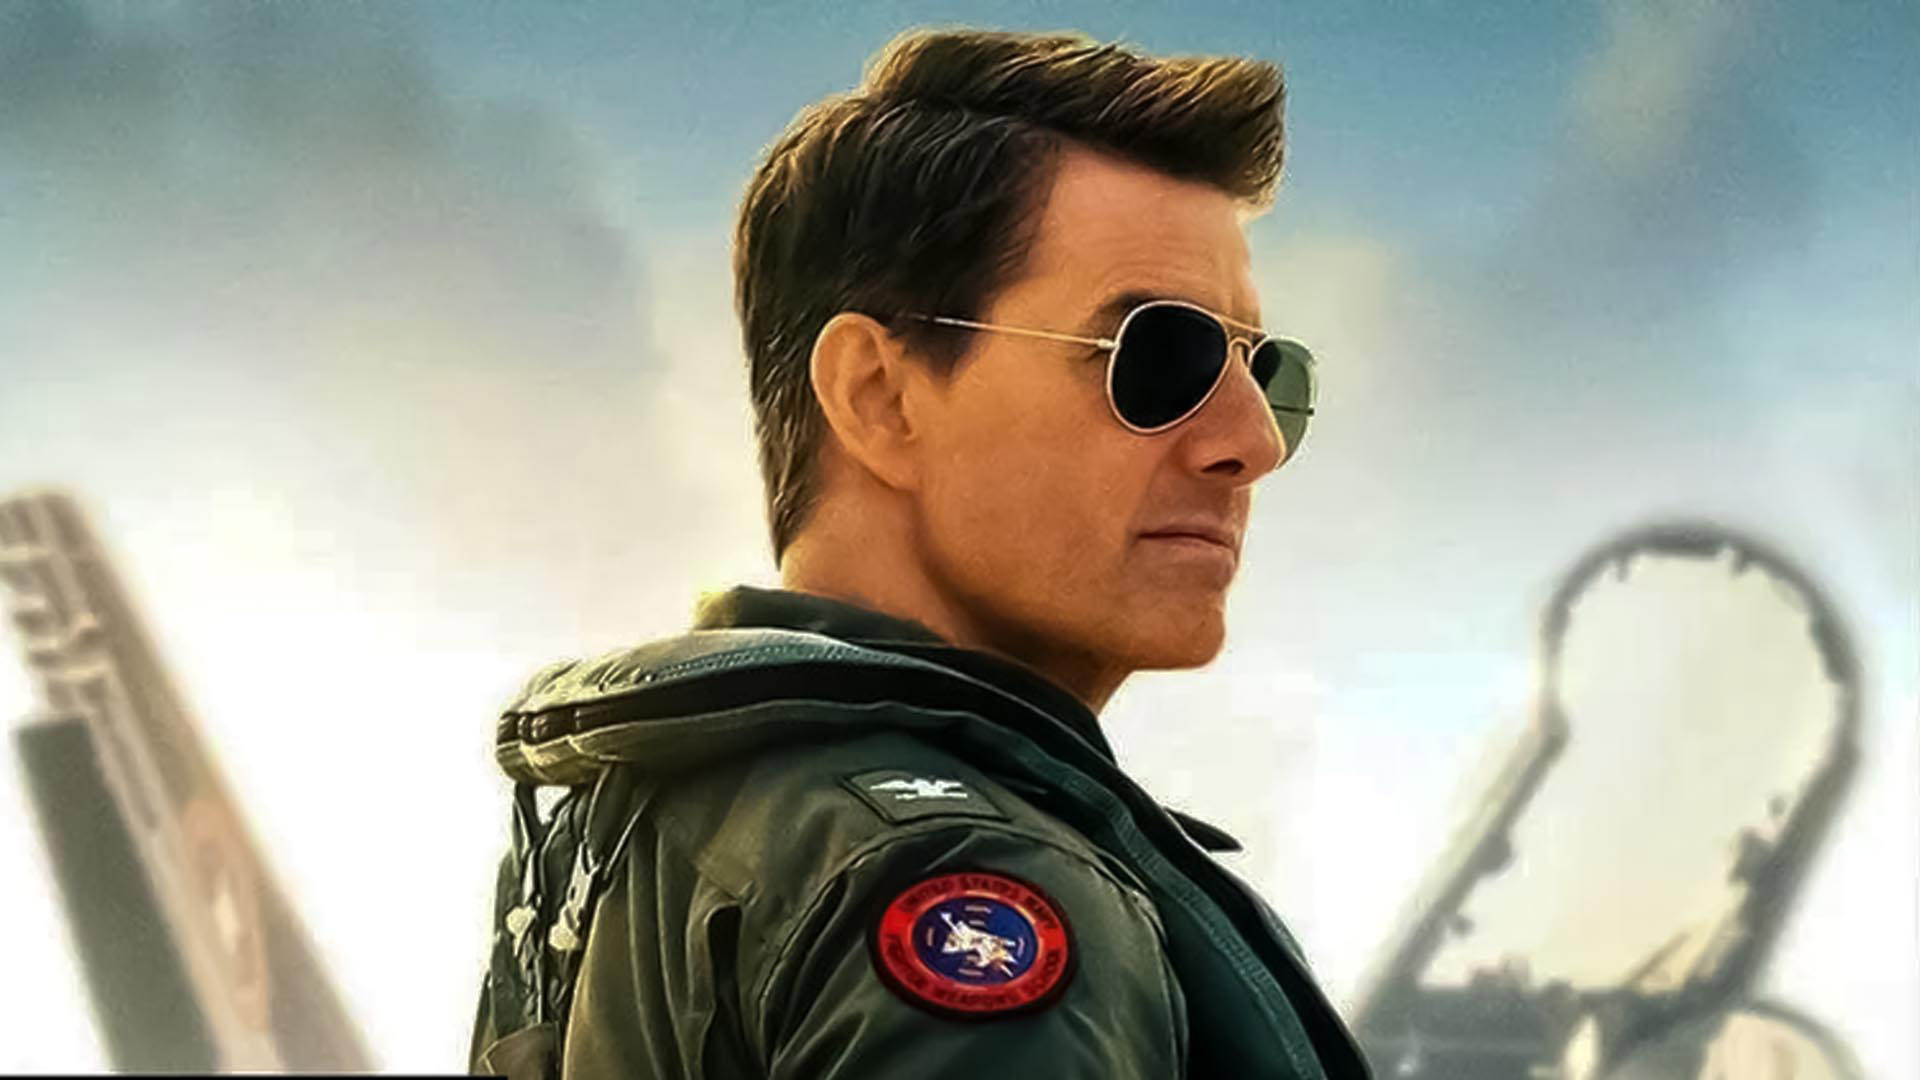 Top Gun: Maverick, starring Tom Cruise, has become the highest grossing film of 2022 so far after surpassing one billion dollars at the global box office. Tom Cruise's latest action film is also the most successful in terms of box office revenue of his entire career. Maverick has already made $1.006 billion (£813 million) since its release a month ago, according to Variety. Previously, the biggest film of the year was the Marvel sequel Doctor Strange in the Multiverse of Madness, which raked in $947m (£772m).  Cruise's biggest hit to date was Mission: Impossible - Fallout in 2018, which made $792 million worldwide. Maverick has been well received by critics following its release. In particular, Cruise's performance and the film's aerial stunt work have been praised. In addition to Cruise, Miles Teller, Jon Hamm, Jennifer Connelly, Glen Powell, Ed Harris and Val Kilmer appear in the film. As a result of his appearance in the film, Kilmer shared a touching message with Cruise earlier this month. Cruise has previously mentioned his reunion with Kilmer. When asked how it turned out, Cruise said: It was lovely. The whole experience, you know, 36 years to make this film.